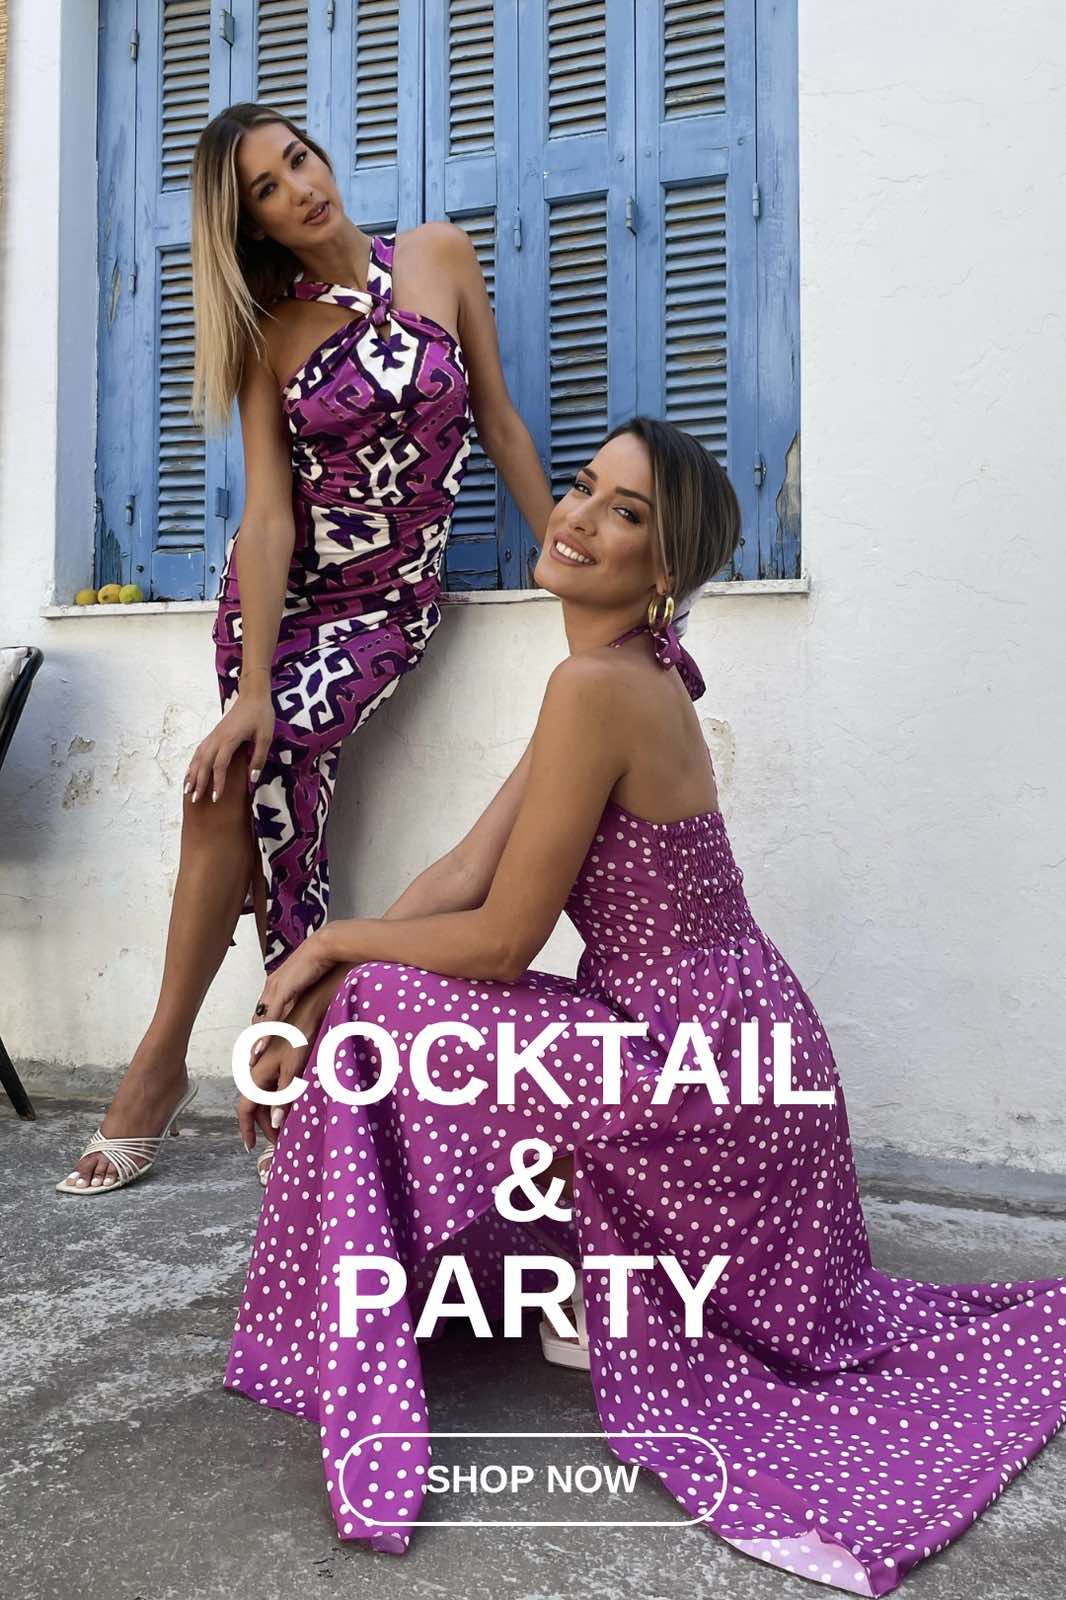 Cocktail & Party